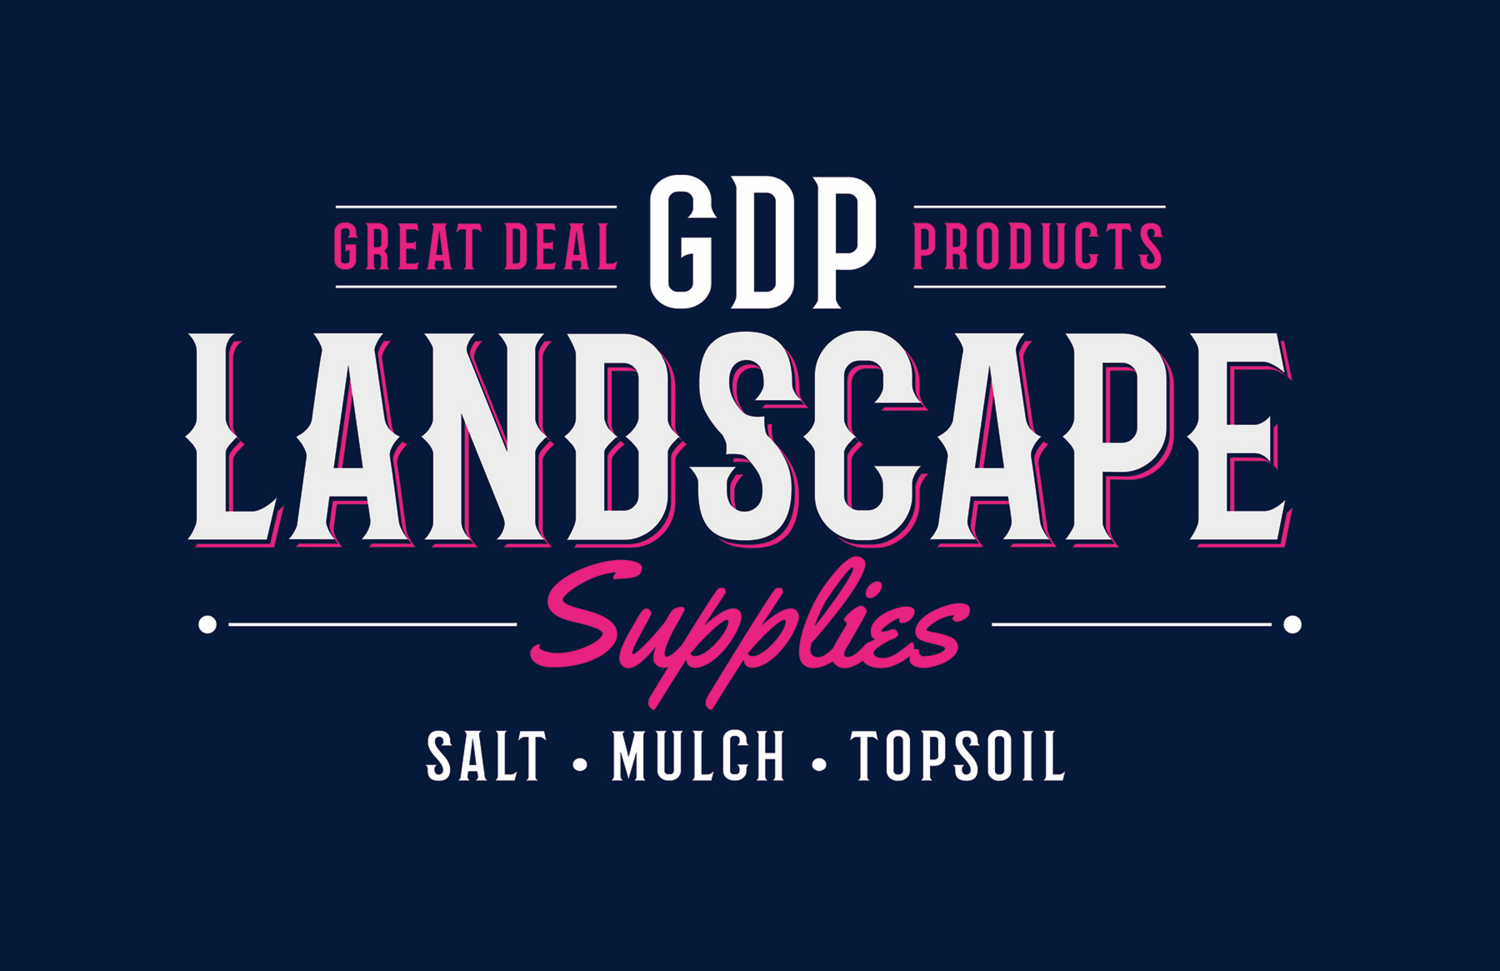 Great Deal Products Supplies